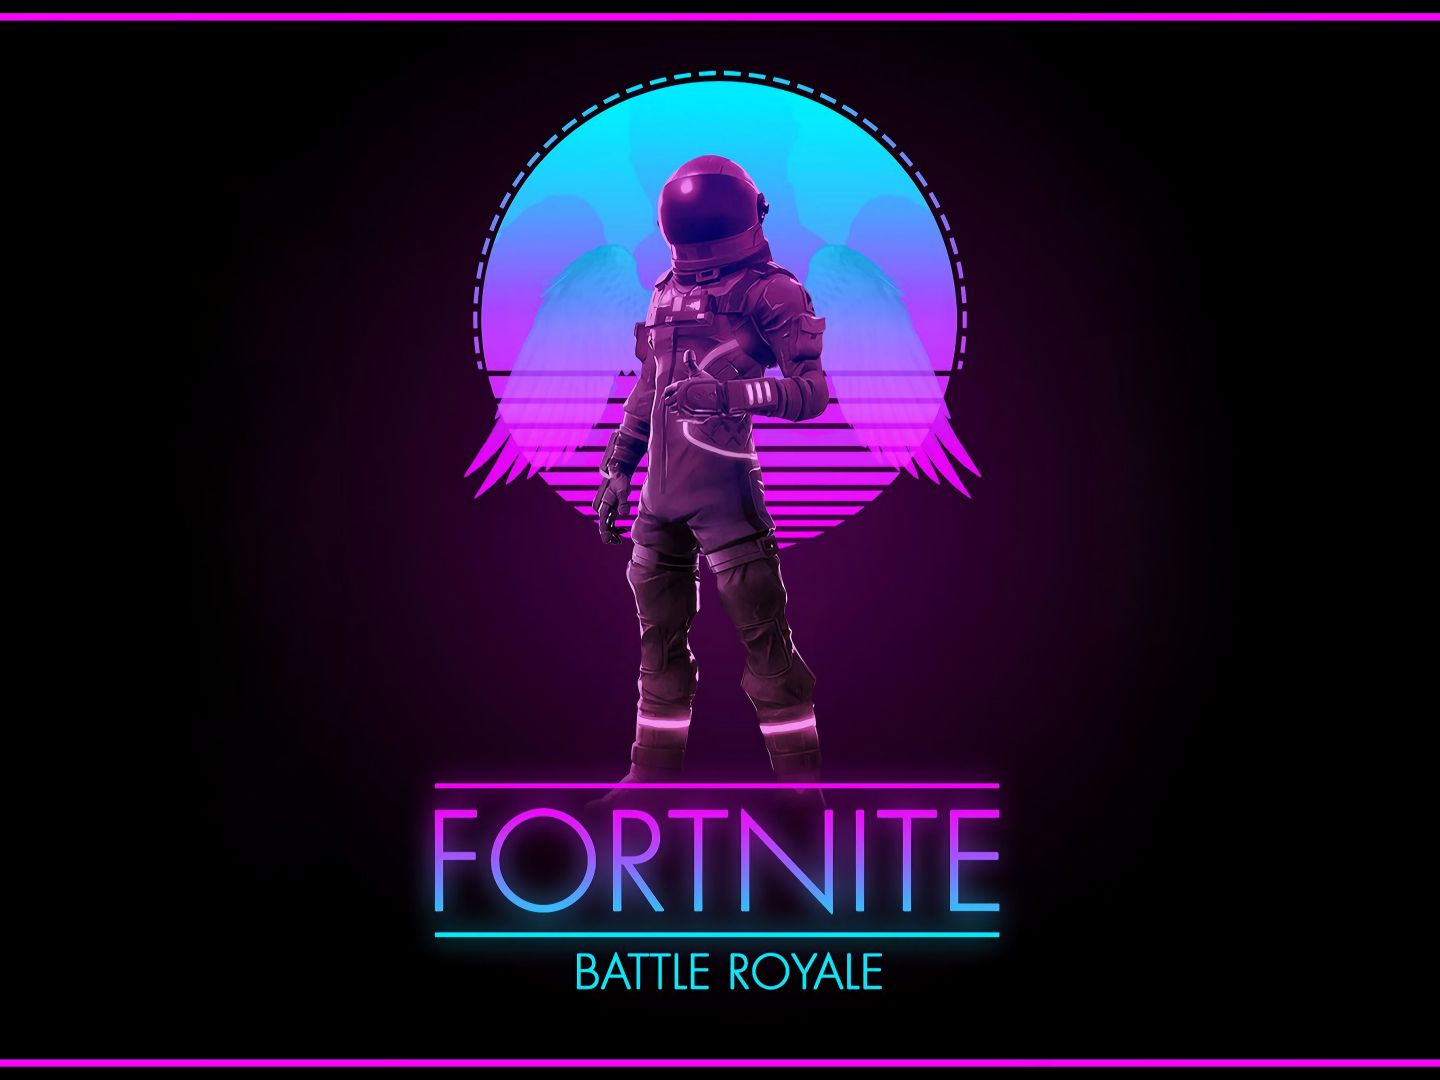 Fortnite Synthwave Royale Wallpaper In 1440x1080 Resolution